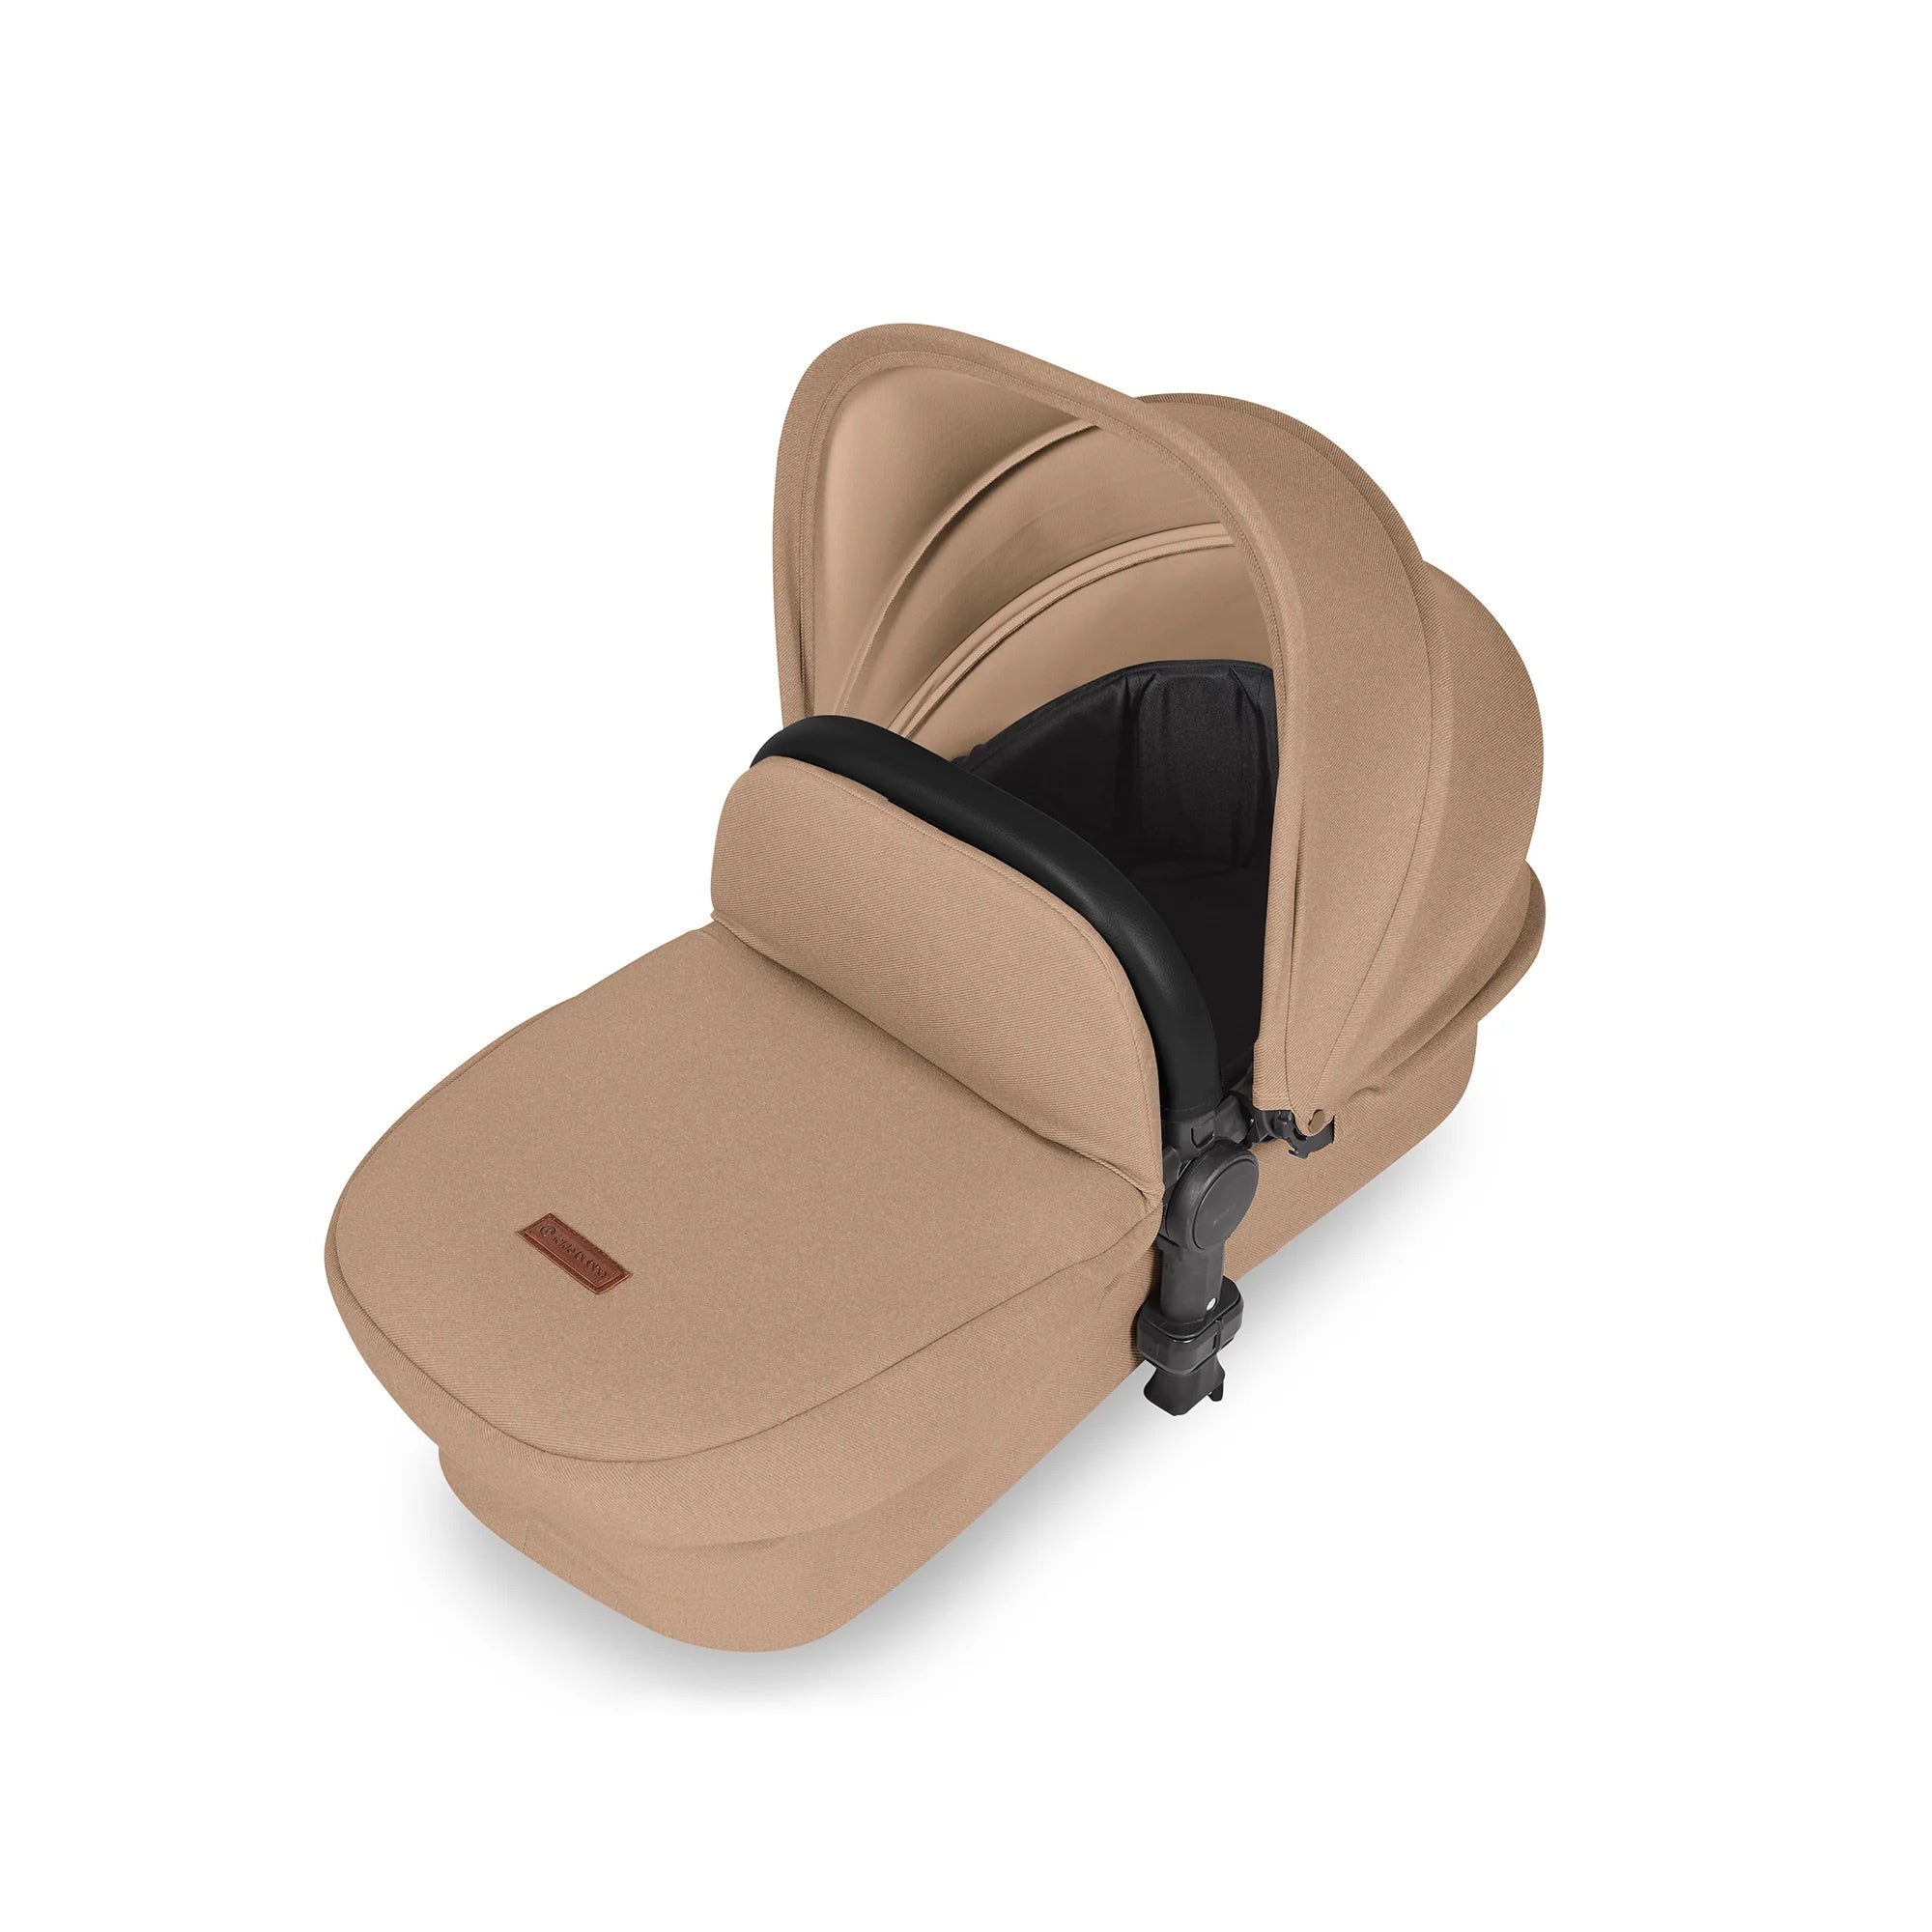 Ickle Bubba Stomp Luxe 2 in 1 Pushchair - Black / Desert / Black - For Your Little One